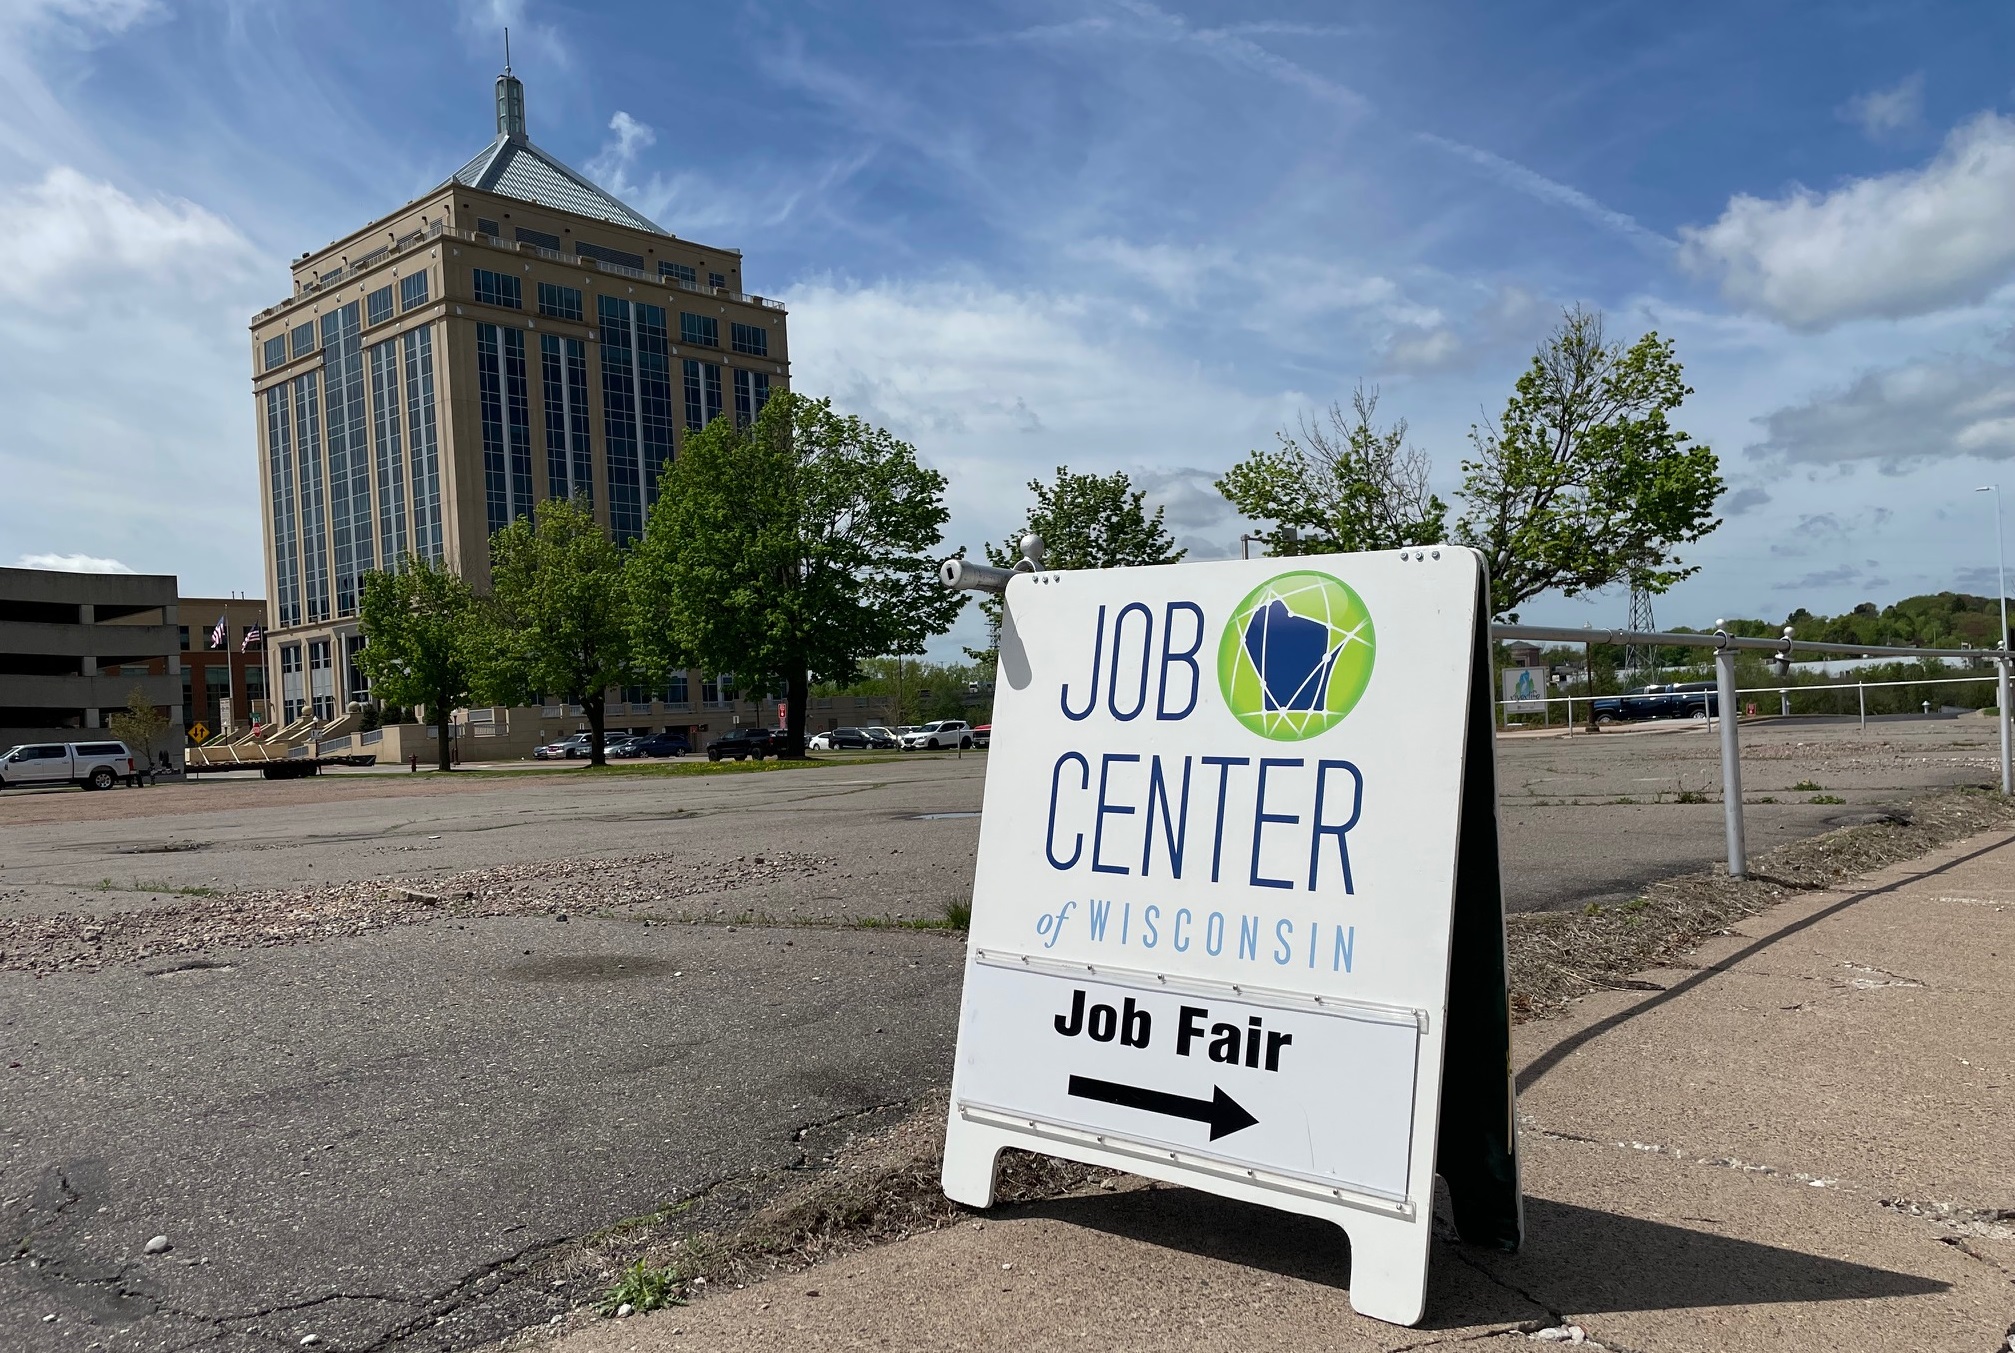 A sign advertises a job fair in Wausau, May 19, 2022.